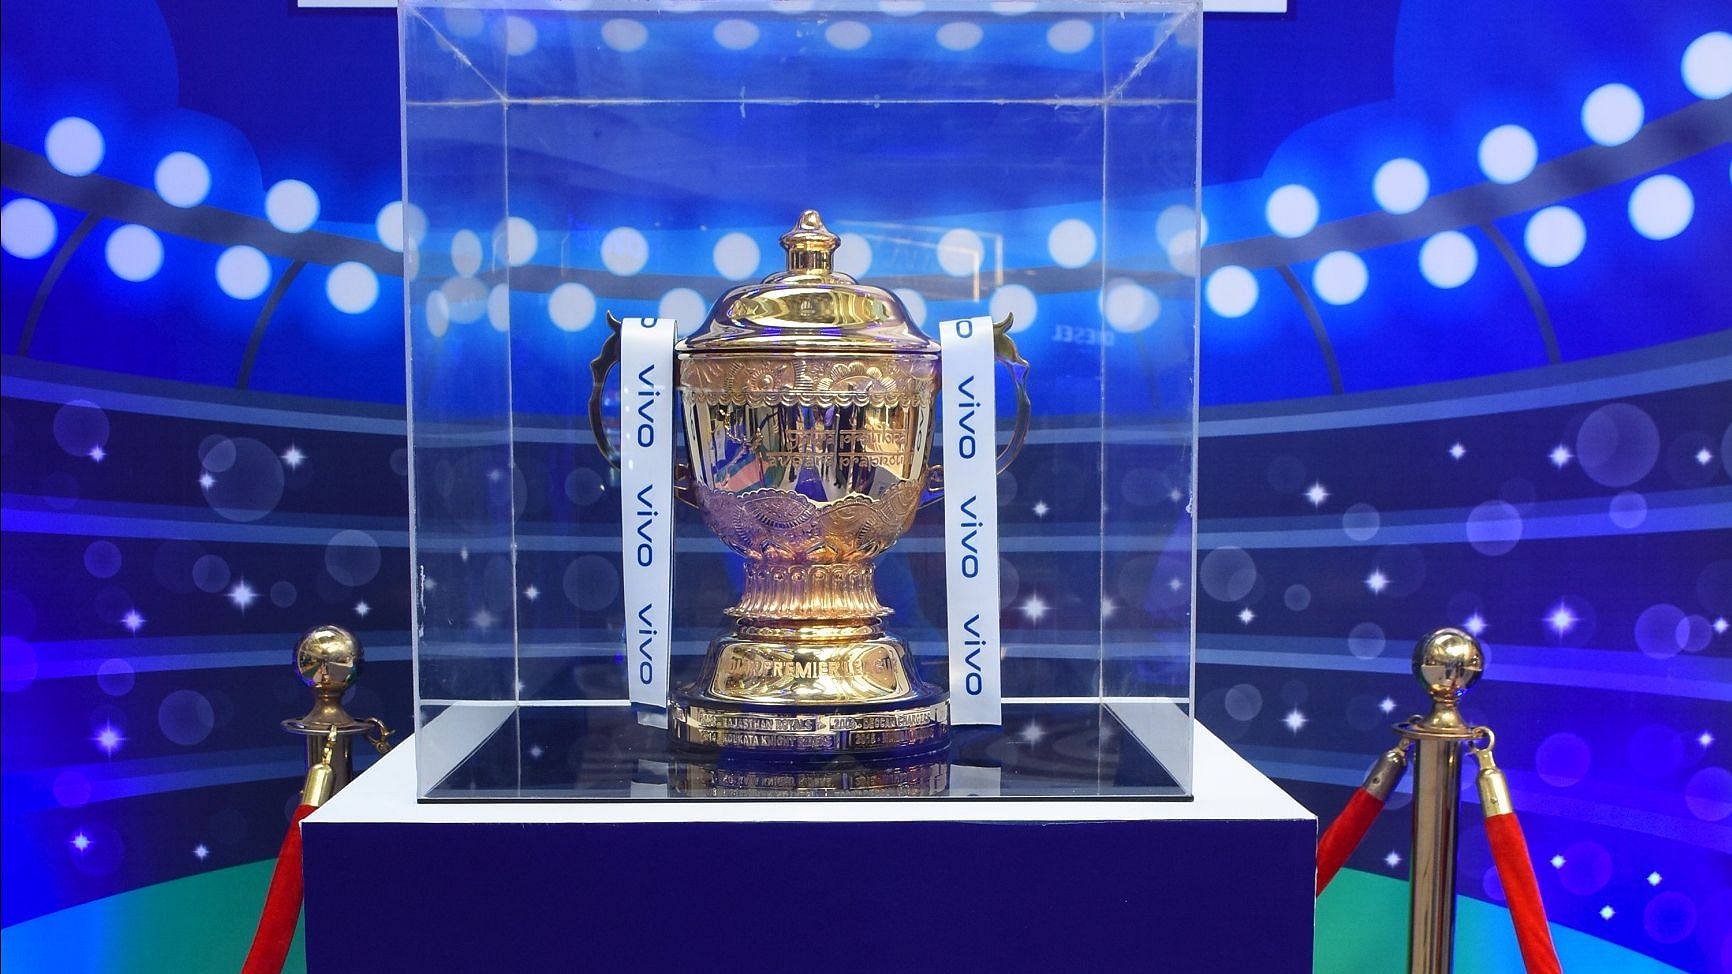 The schedule of the group stages of the 12th edition of the Indian Premier League (IPL) has been released by the BCCI.